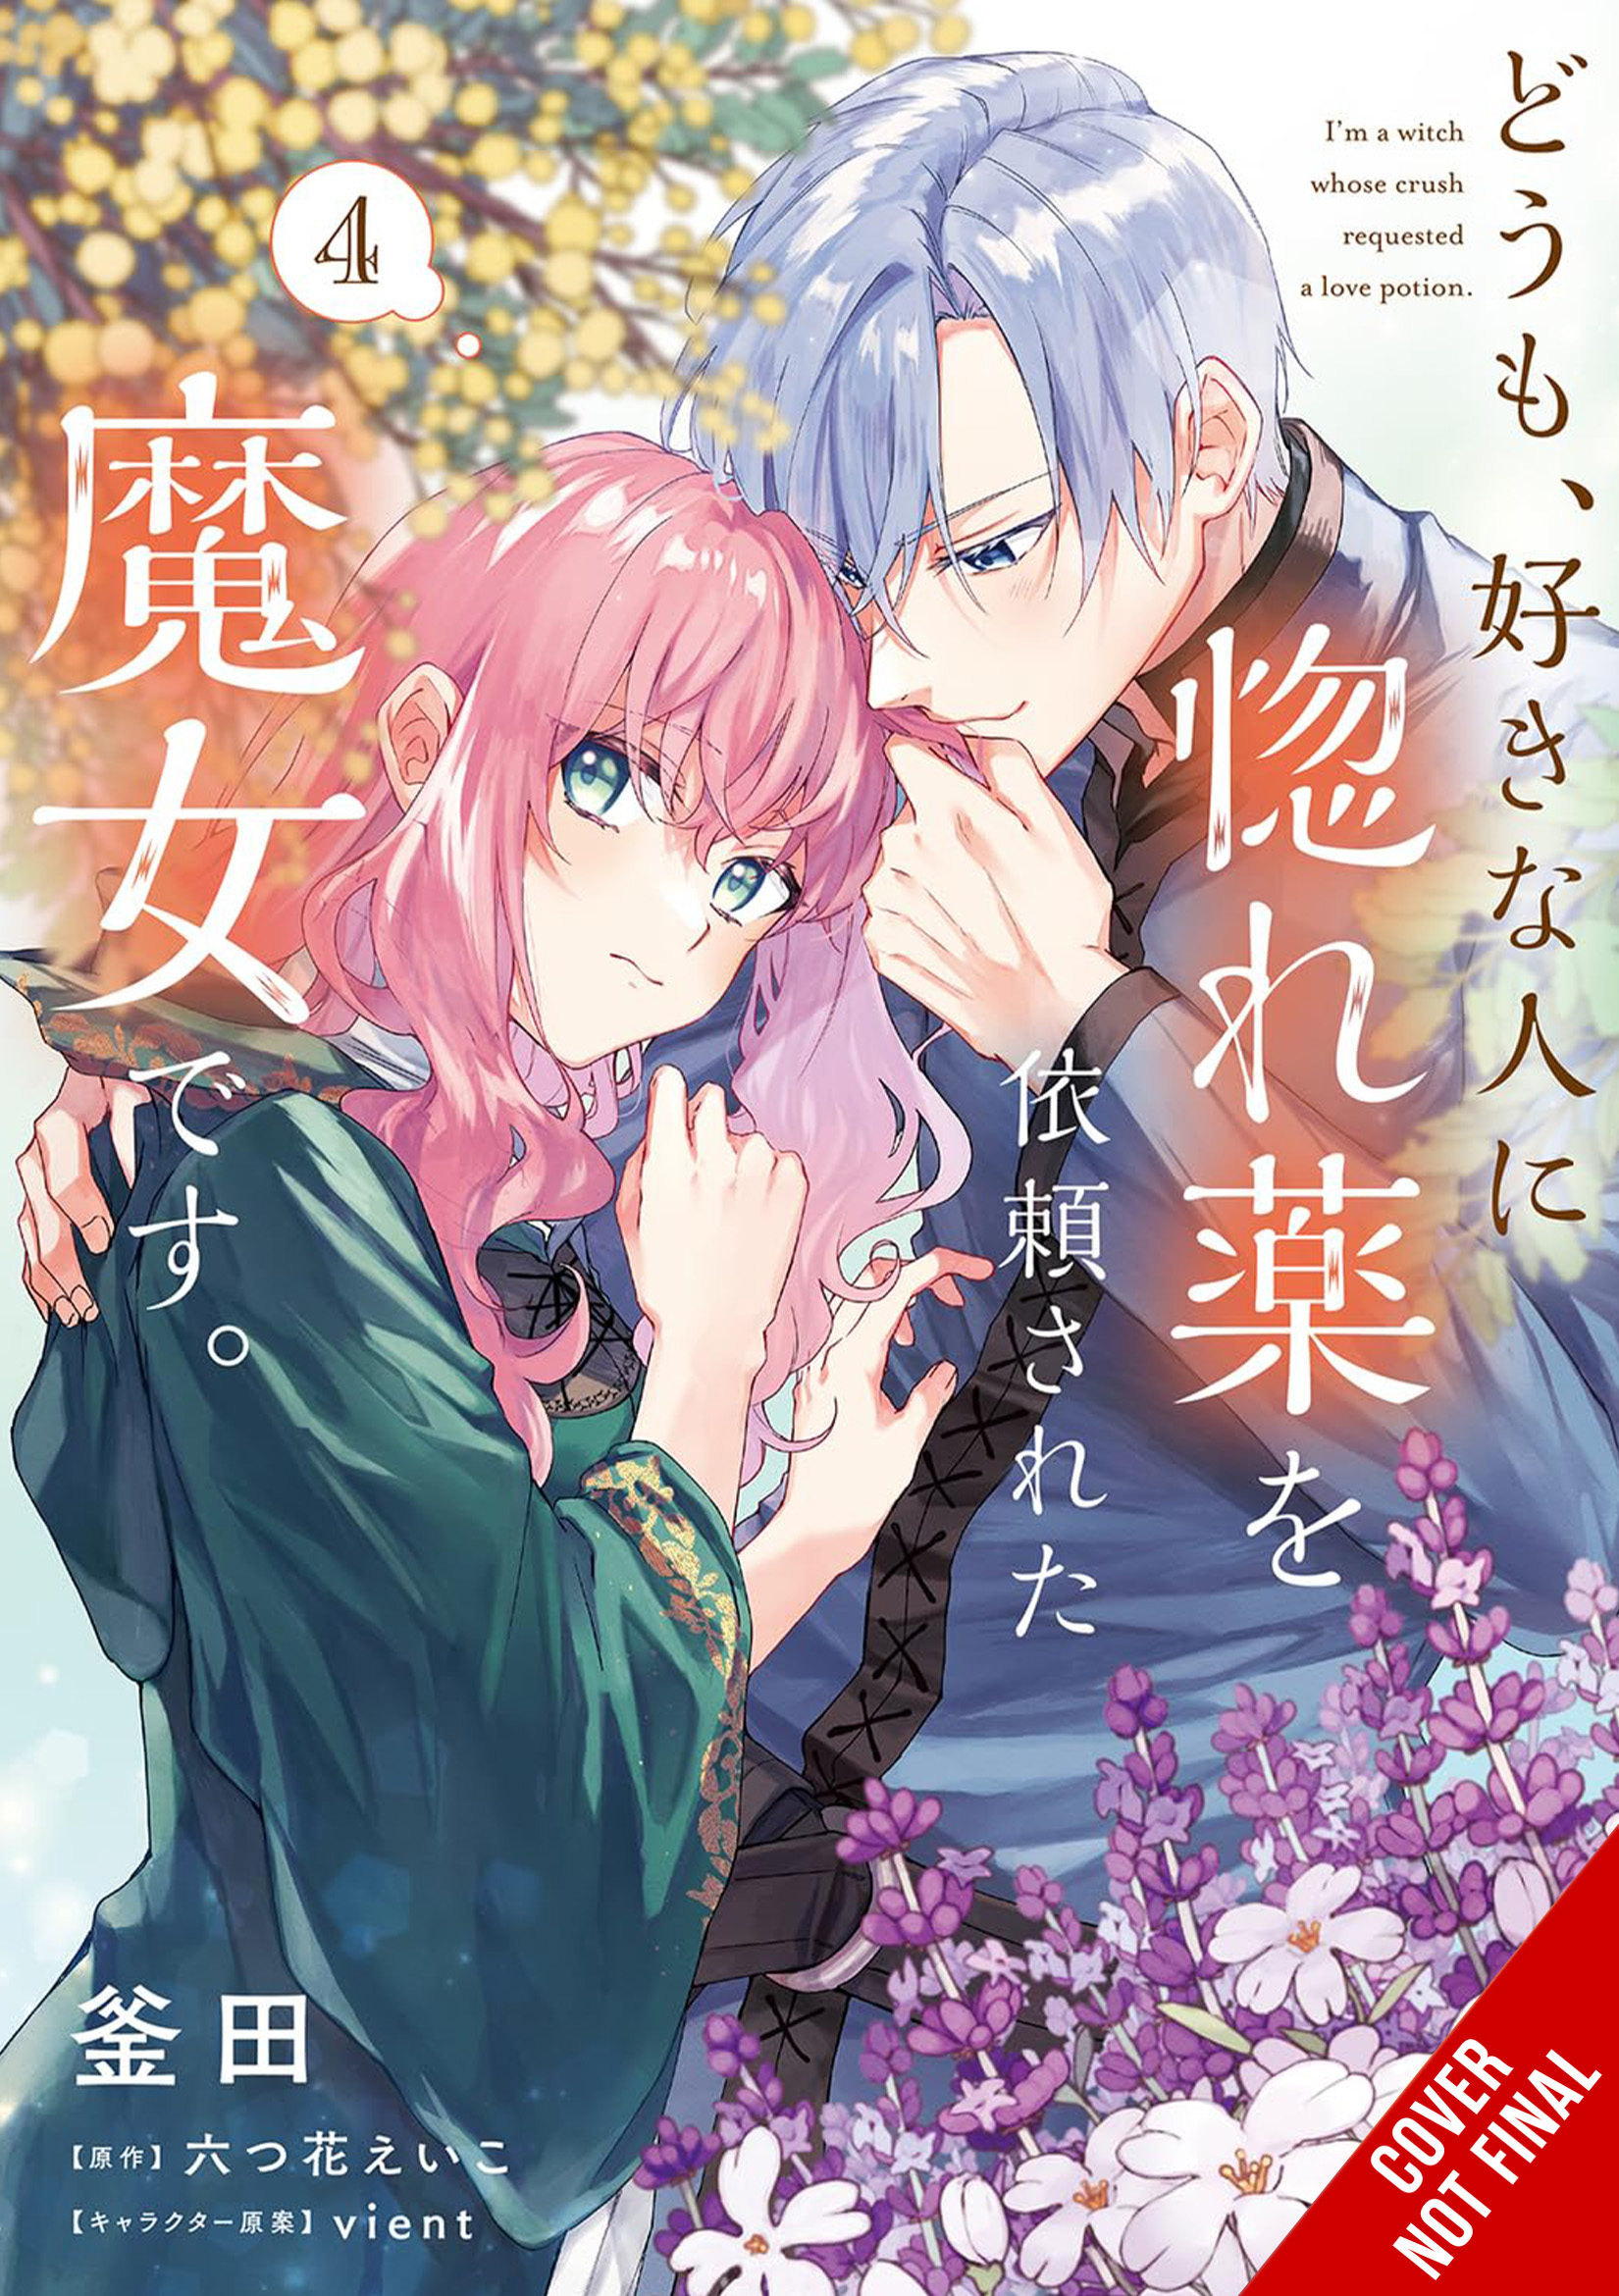 I'm a Witch and My Crush Wants Me to Make a Love Potion Manga Volume 4